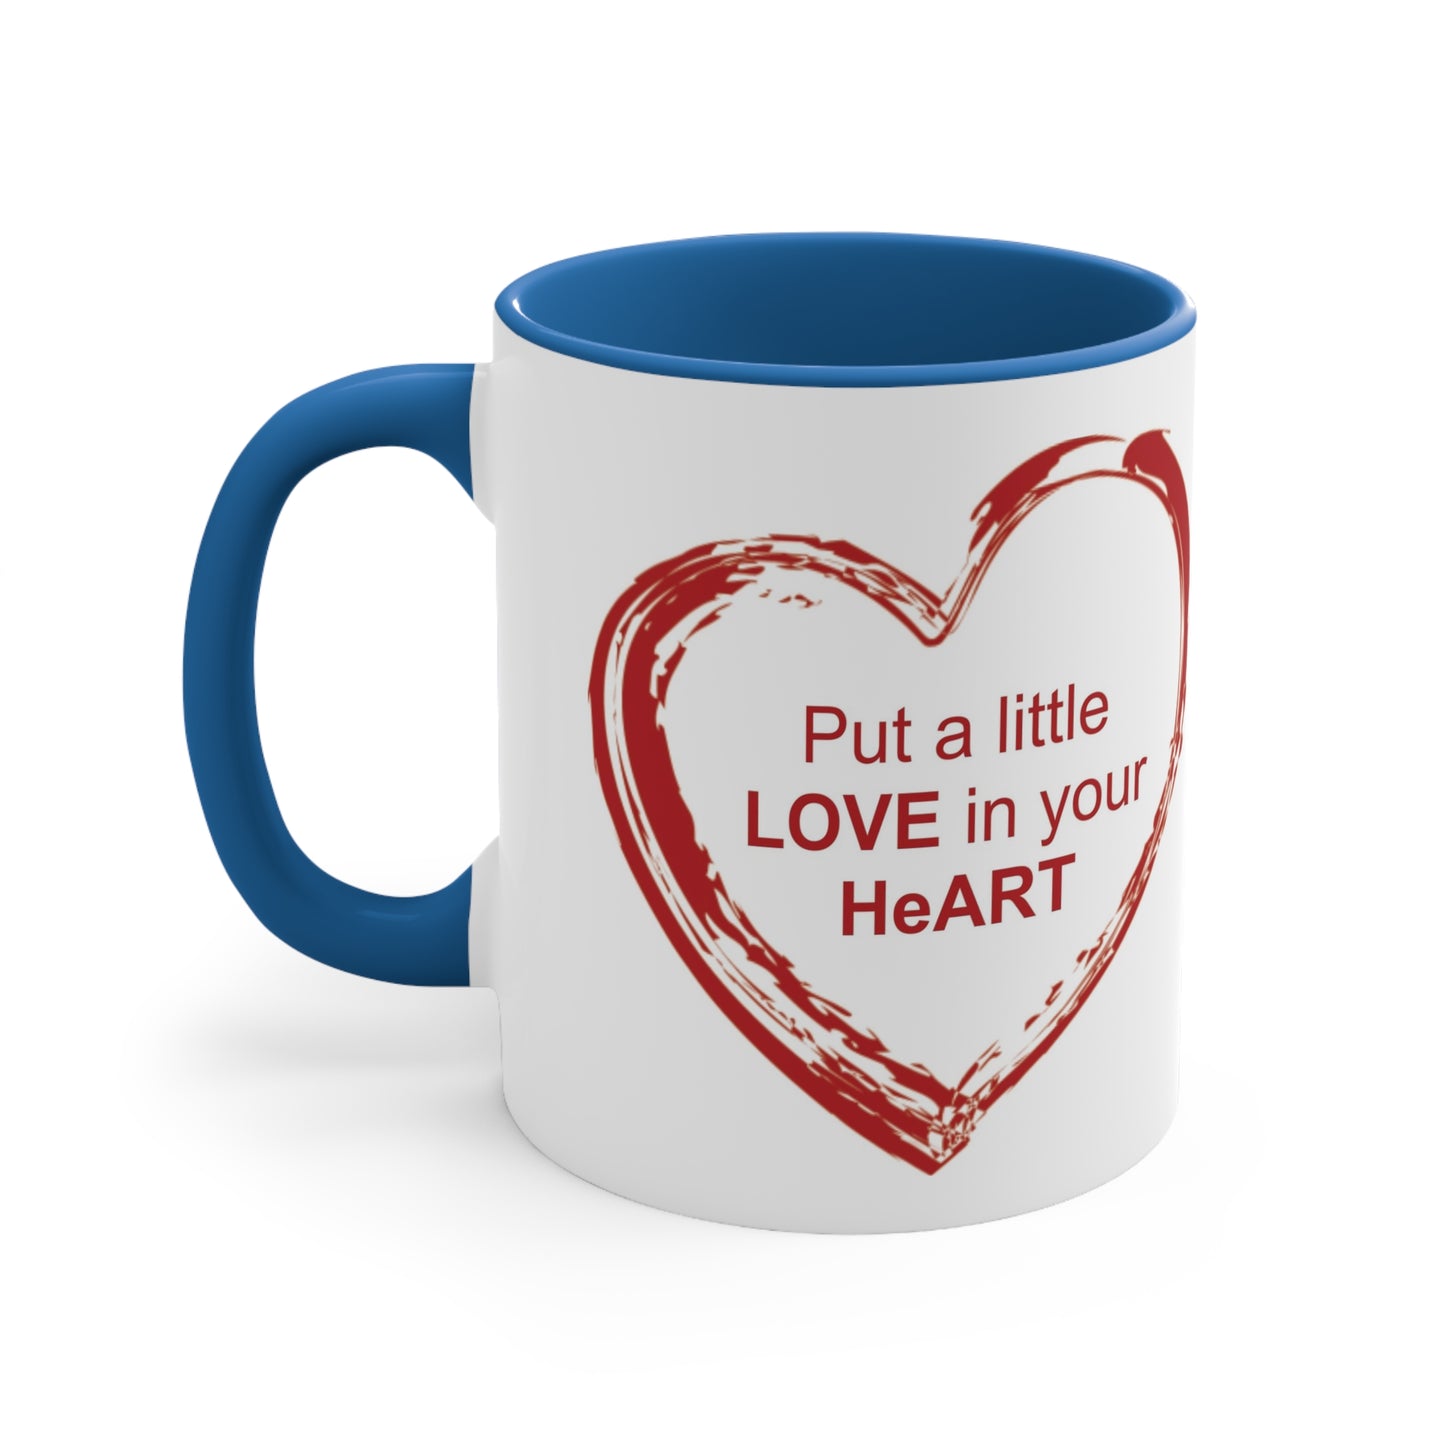 Put A Little Love in Your HeART Accent Coffee Mug, 11oz